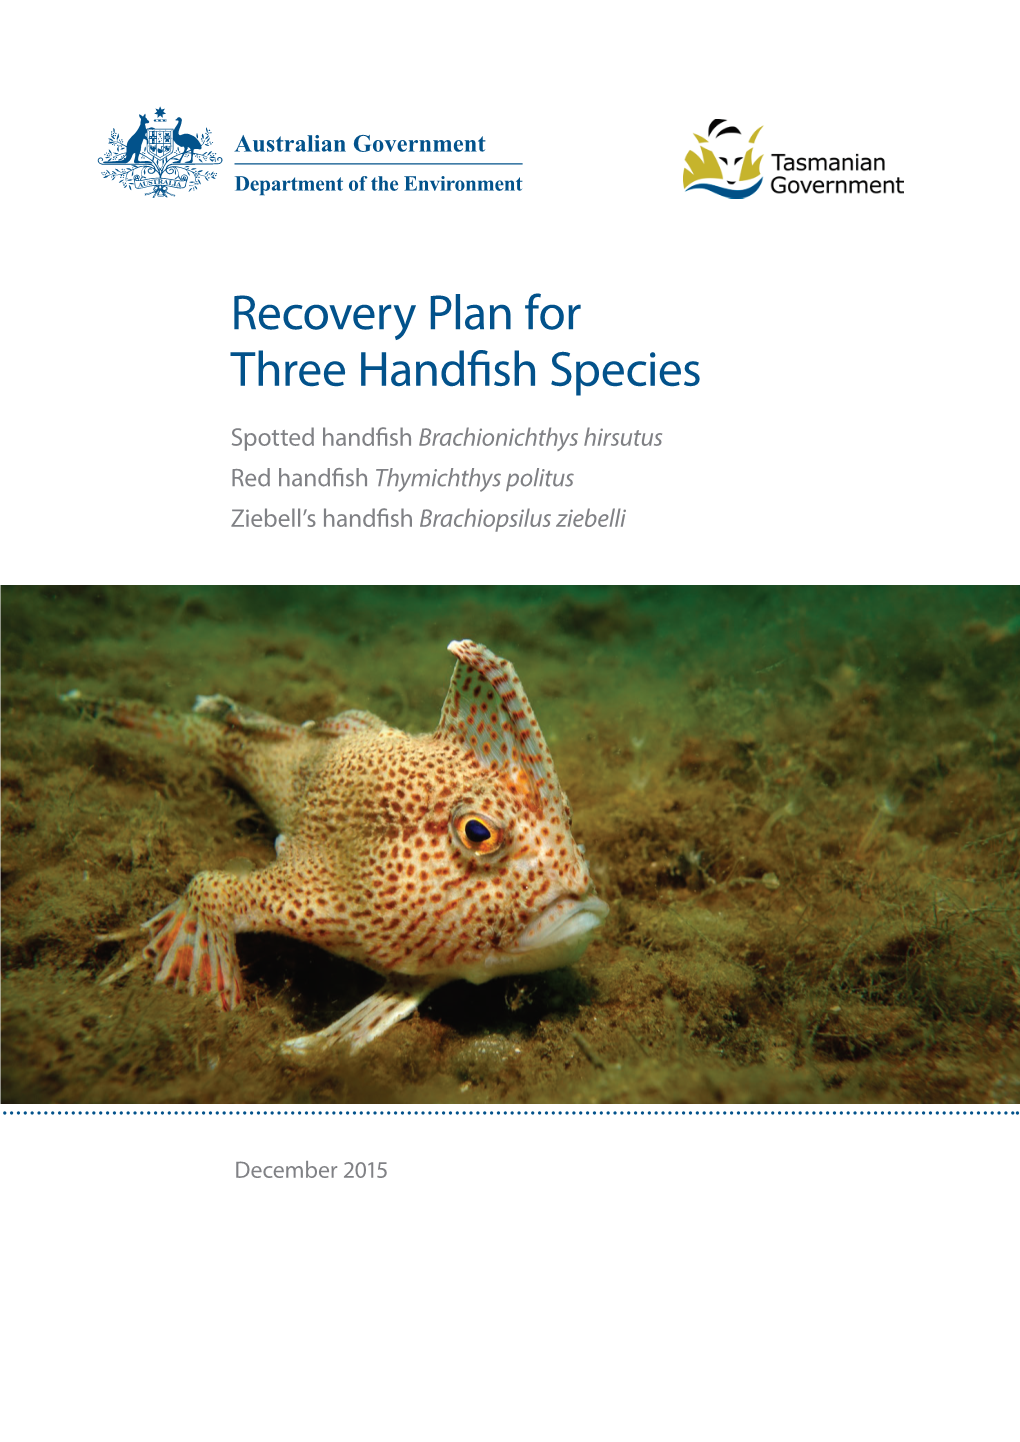 Recovery Plan for Three Handfish Species